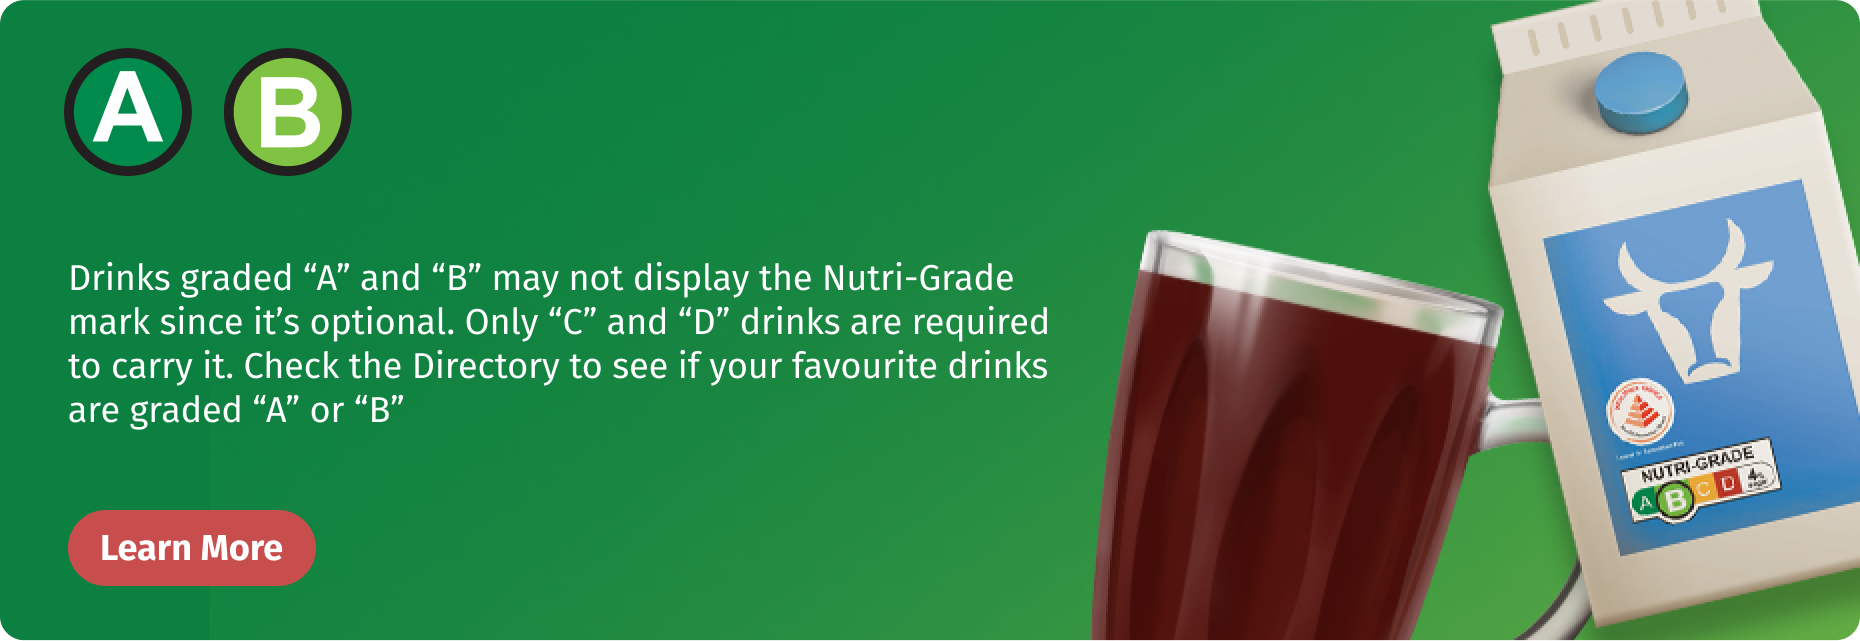 Nutri-Grade A and B drinks may not display the Nutri-Grade mark as it's optional. Click to explore Nutri-Grade A and B drinks